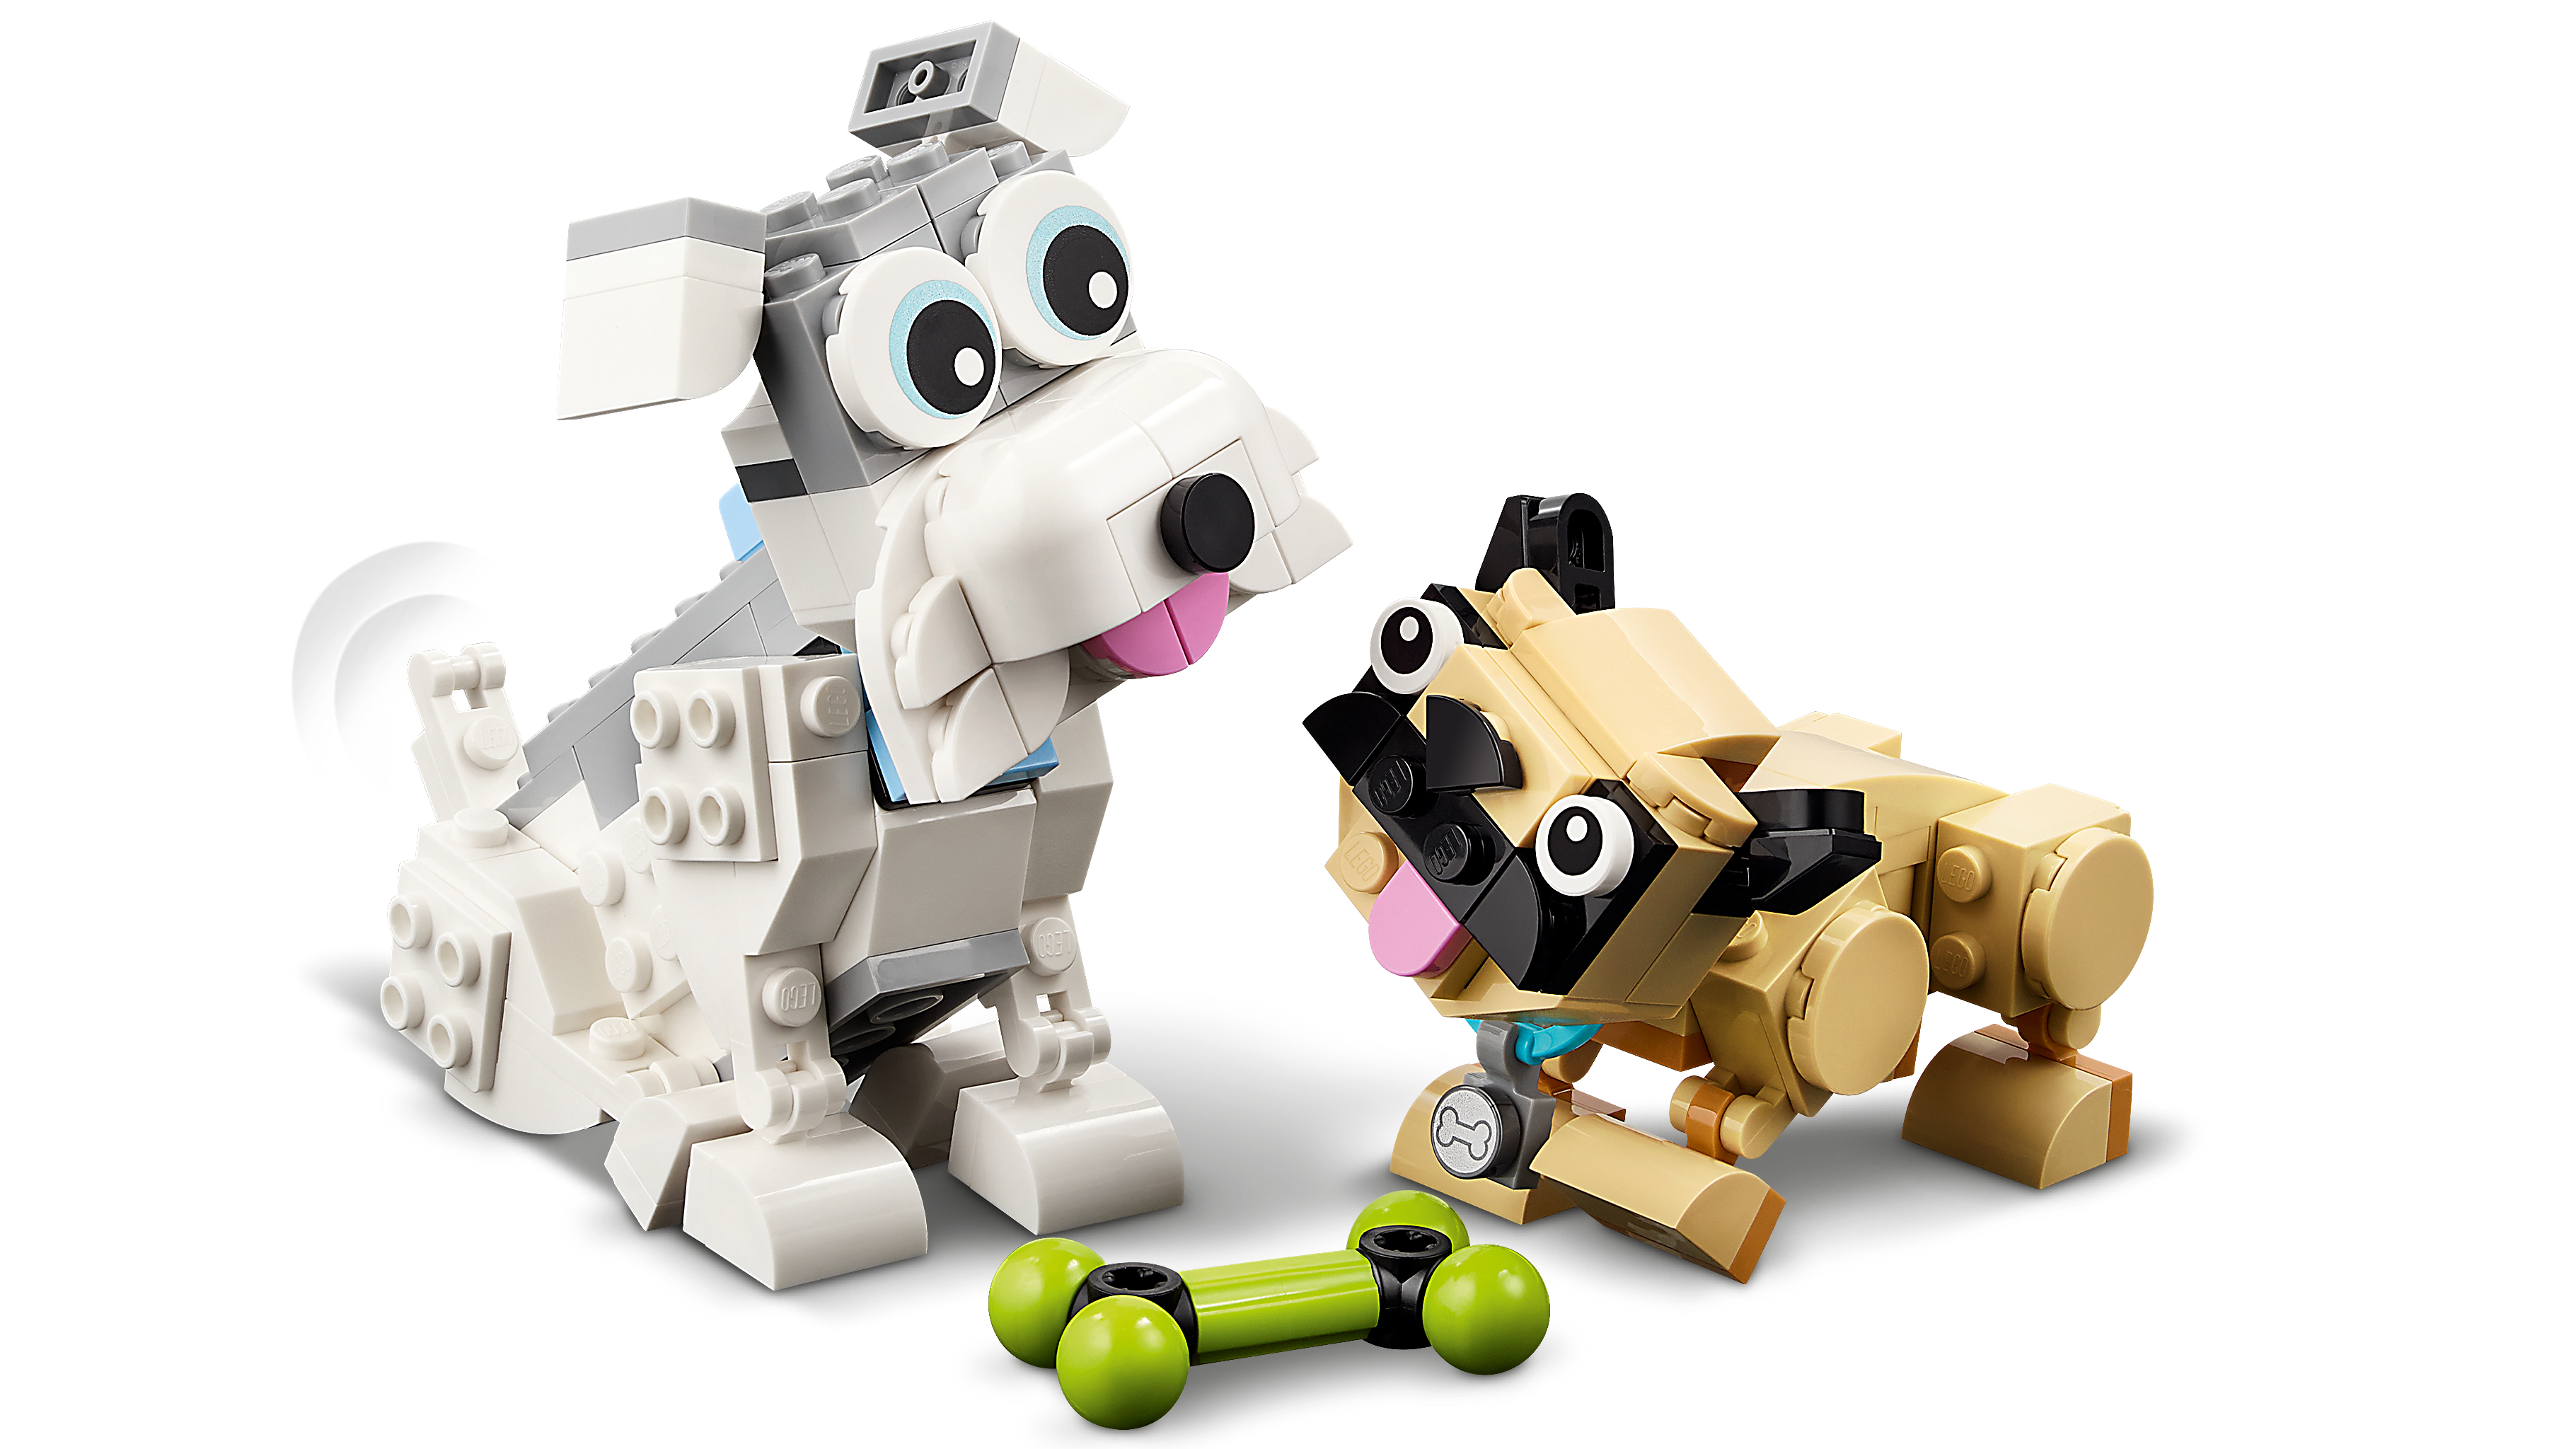 LEGO Creator 3 in 1 Adorable Dogs Building Toy Set, Small Toys for  Christmas, Gift for Dog Lovers, Build a Beagle, Poodle, and Labrador or  Rebuild into Dachshund, Husky, Pug, or Mini